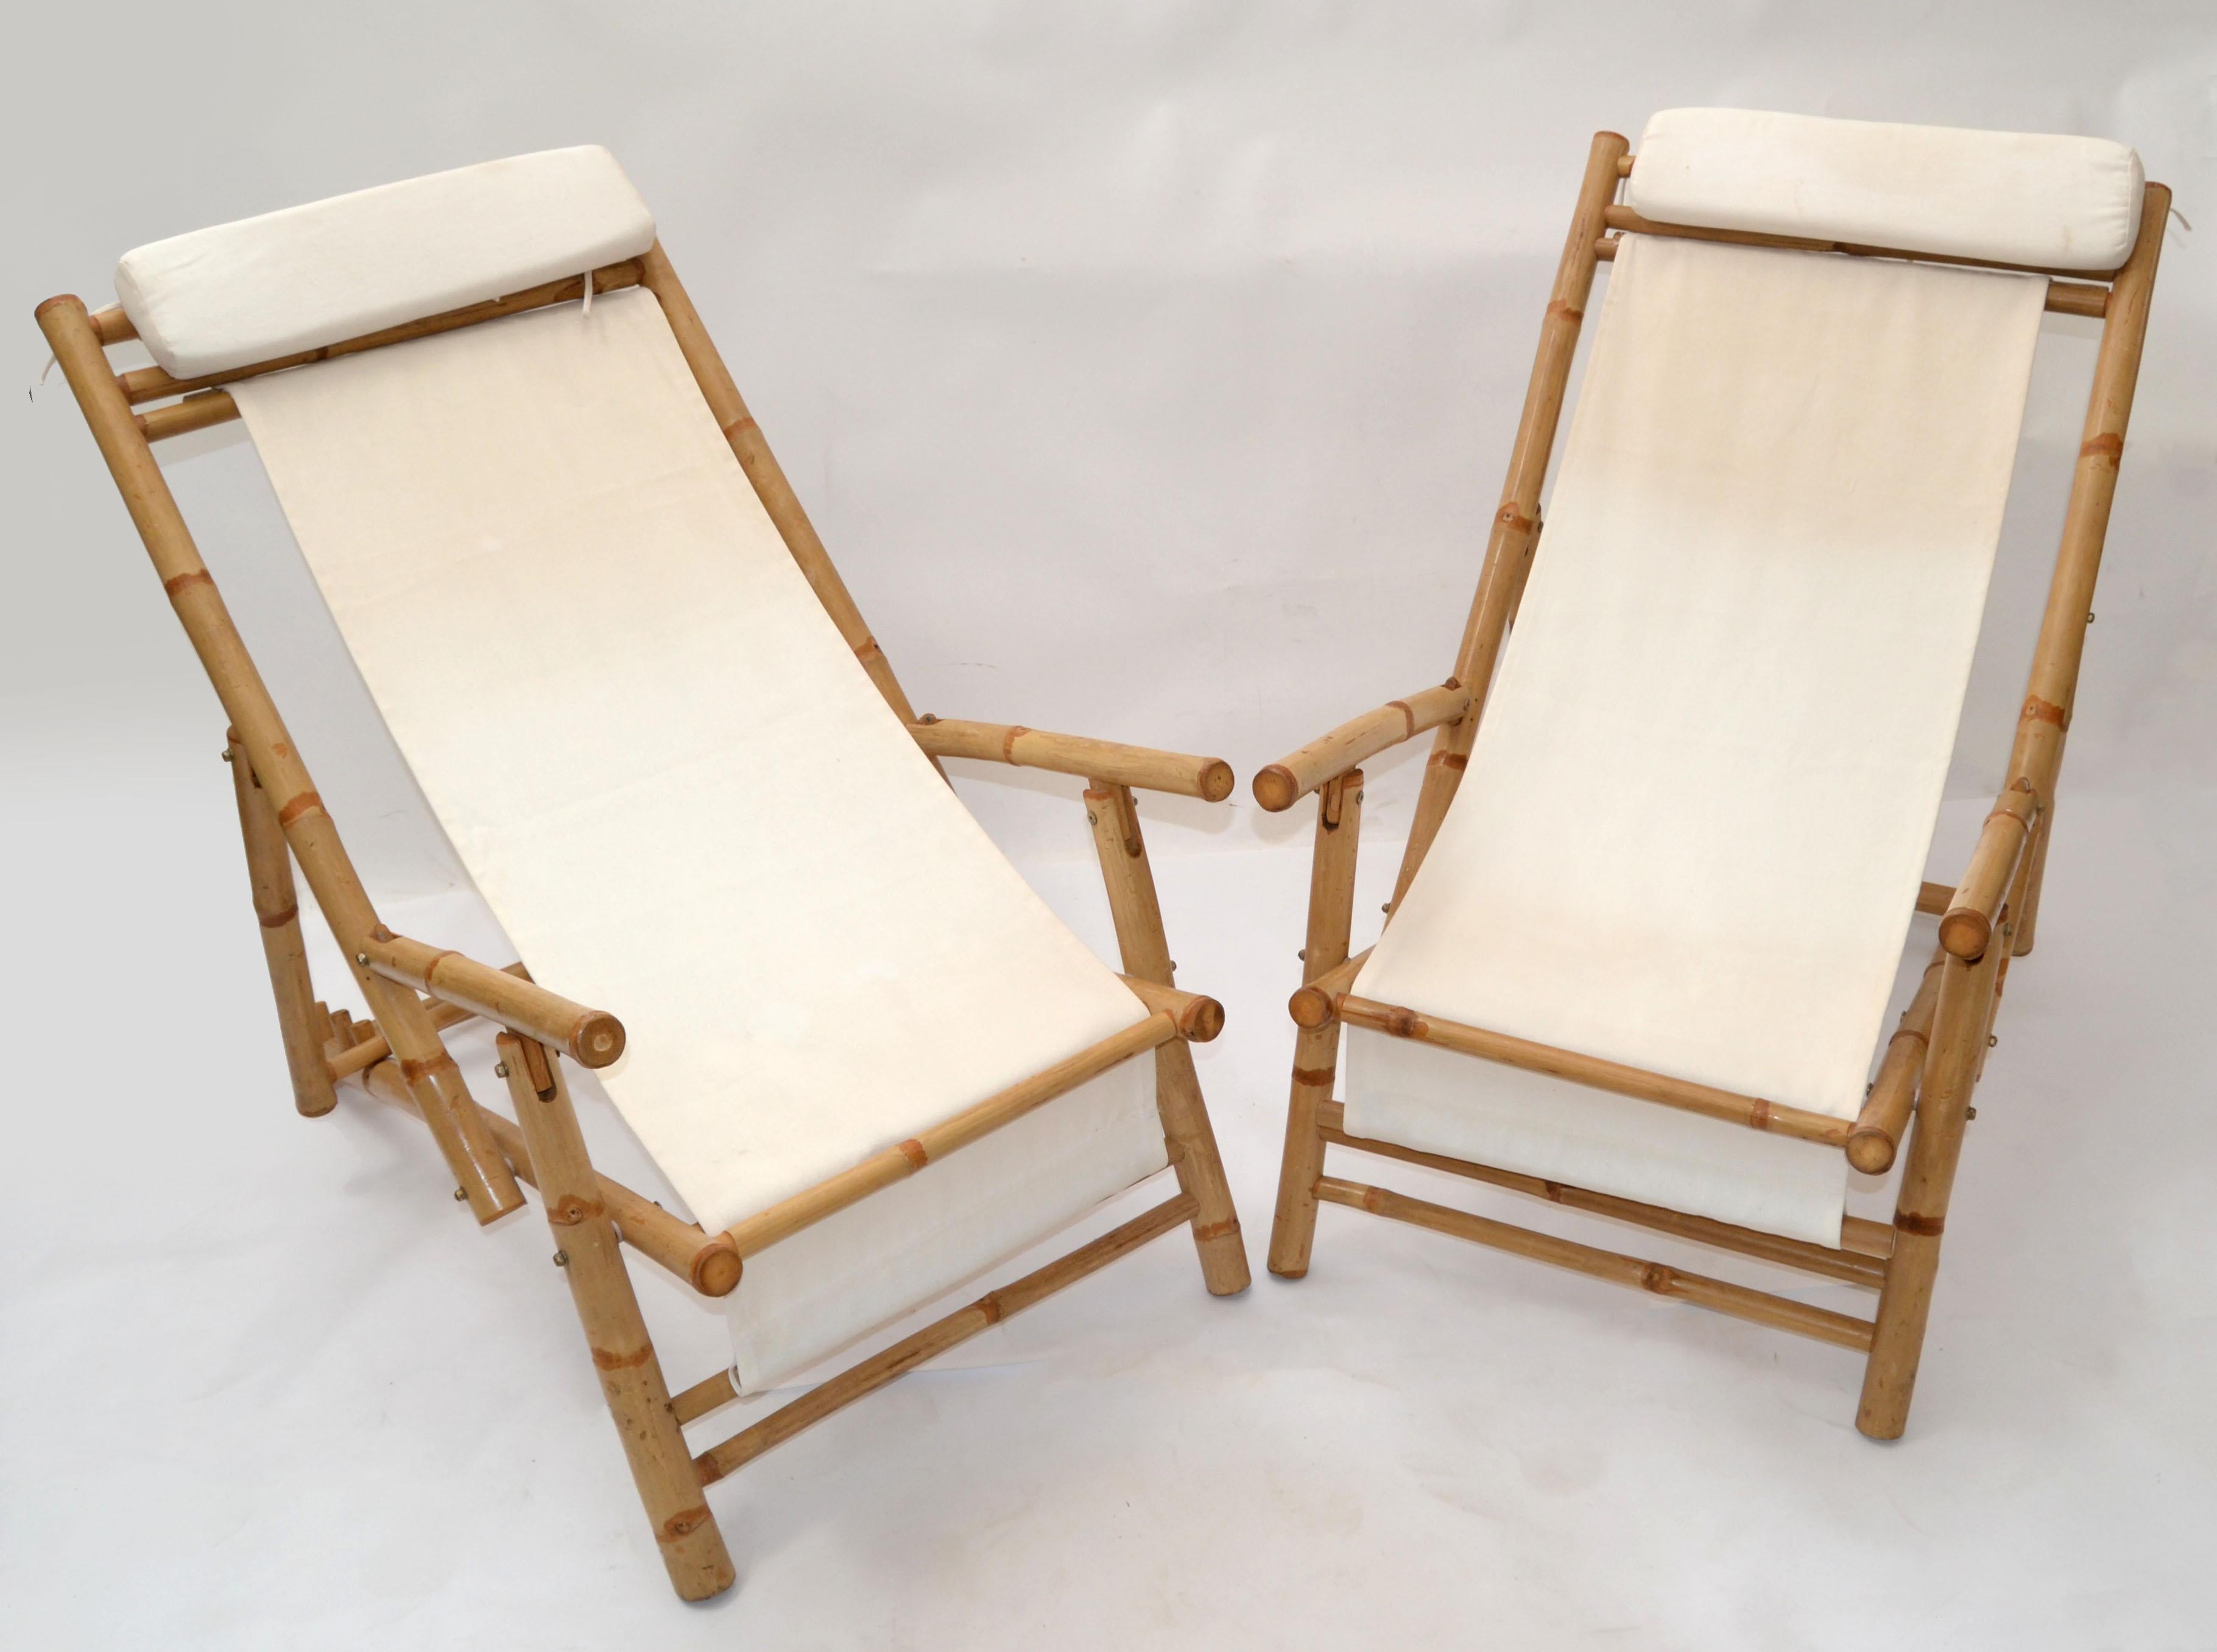 Pair of Mid-Century Modern bamboo, brass hardware and linen fabric folding lounge chairs from the 1970.
With integrated cushion. Original fabric.
Measures folded: H 58 x W 24 x D 6 inches.
Bohemian chic for tropical indoor Spaces, Porche.